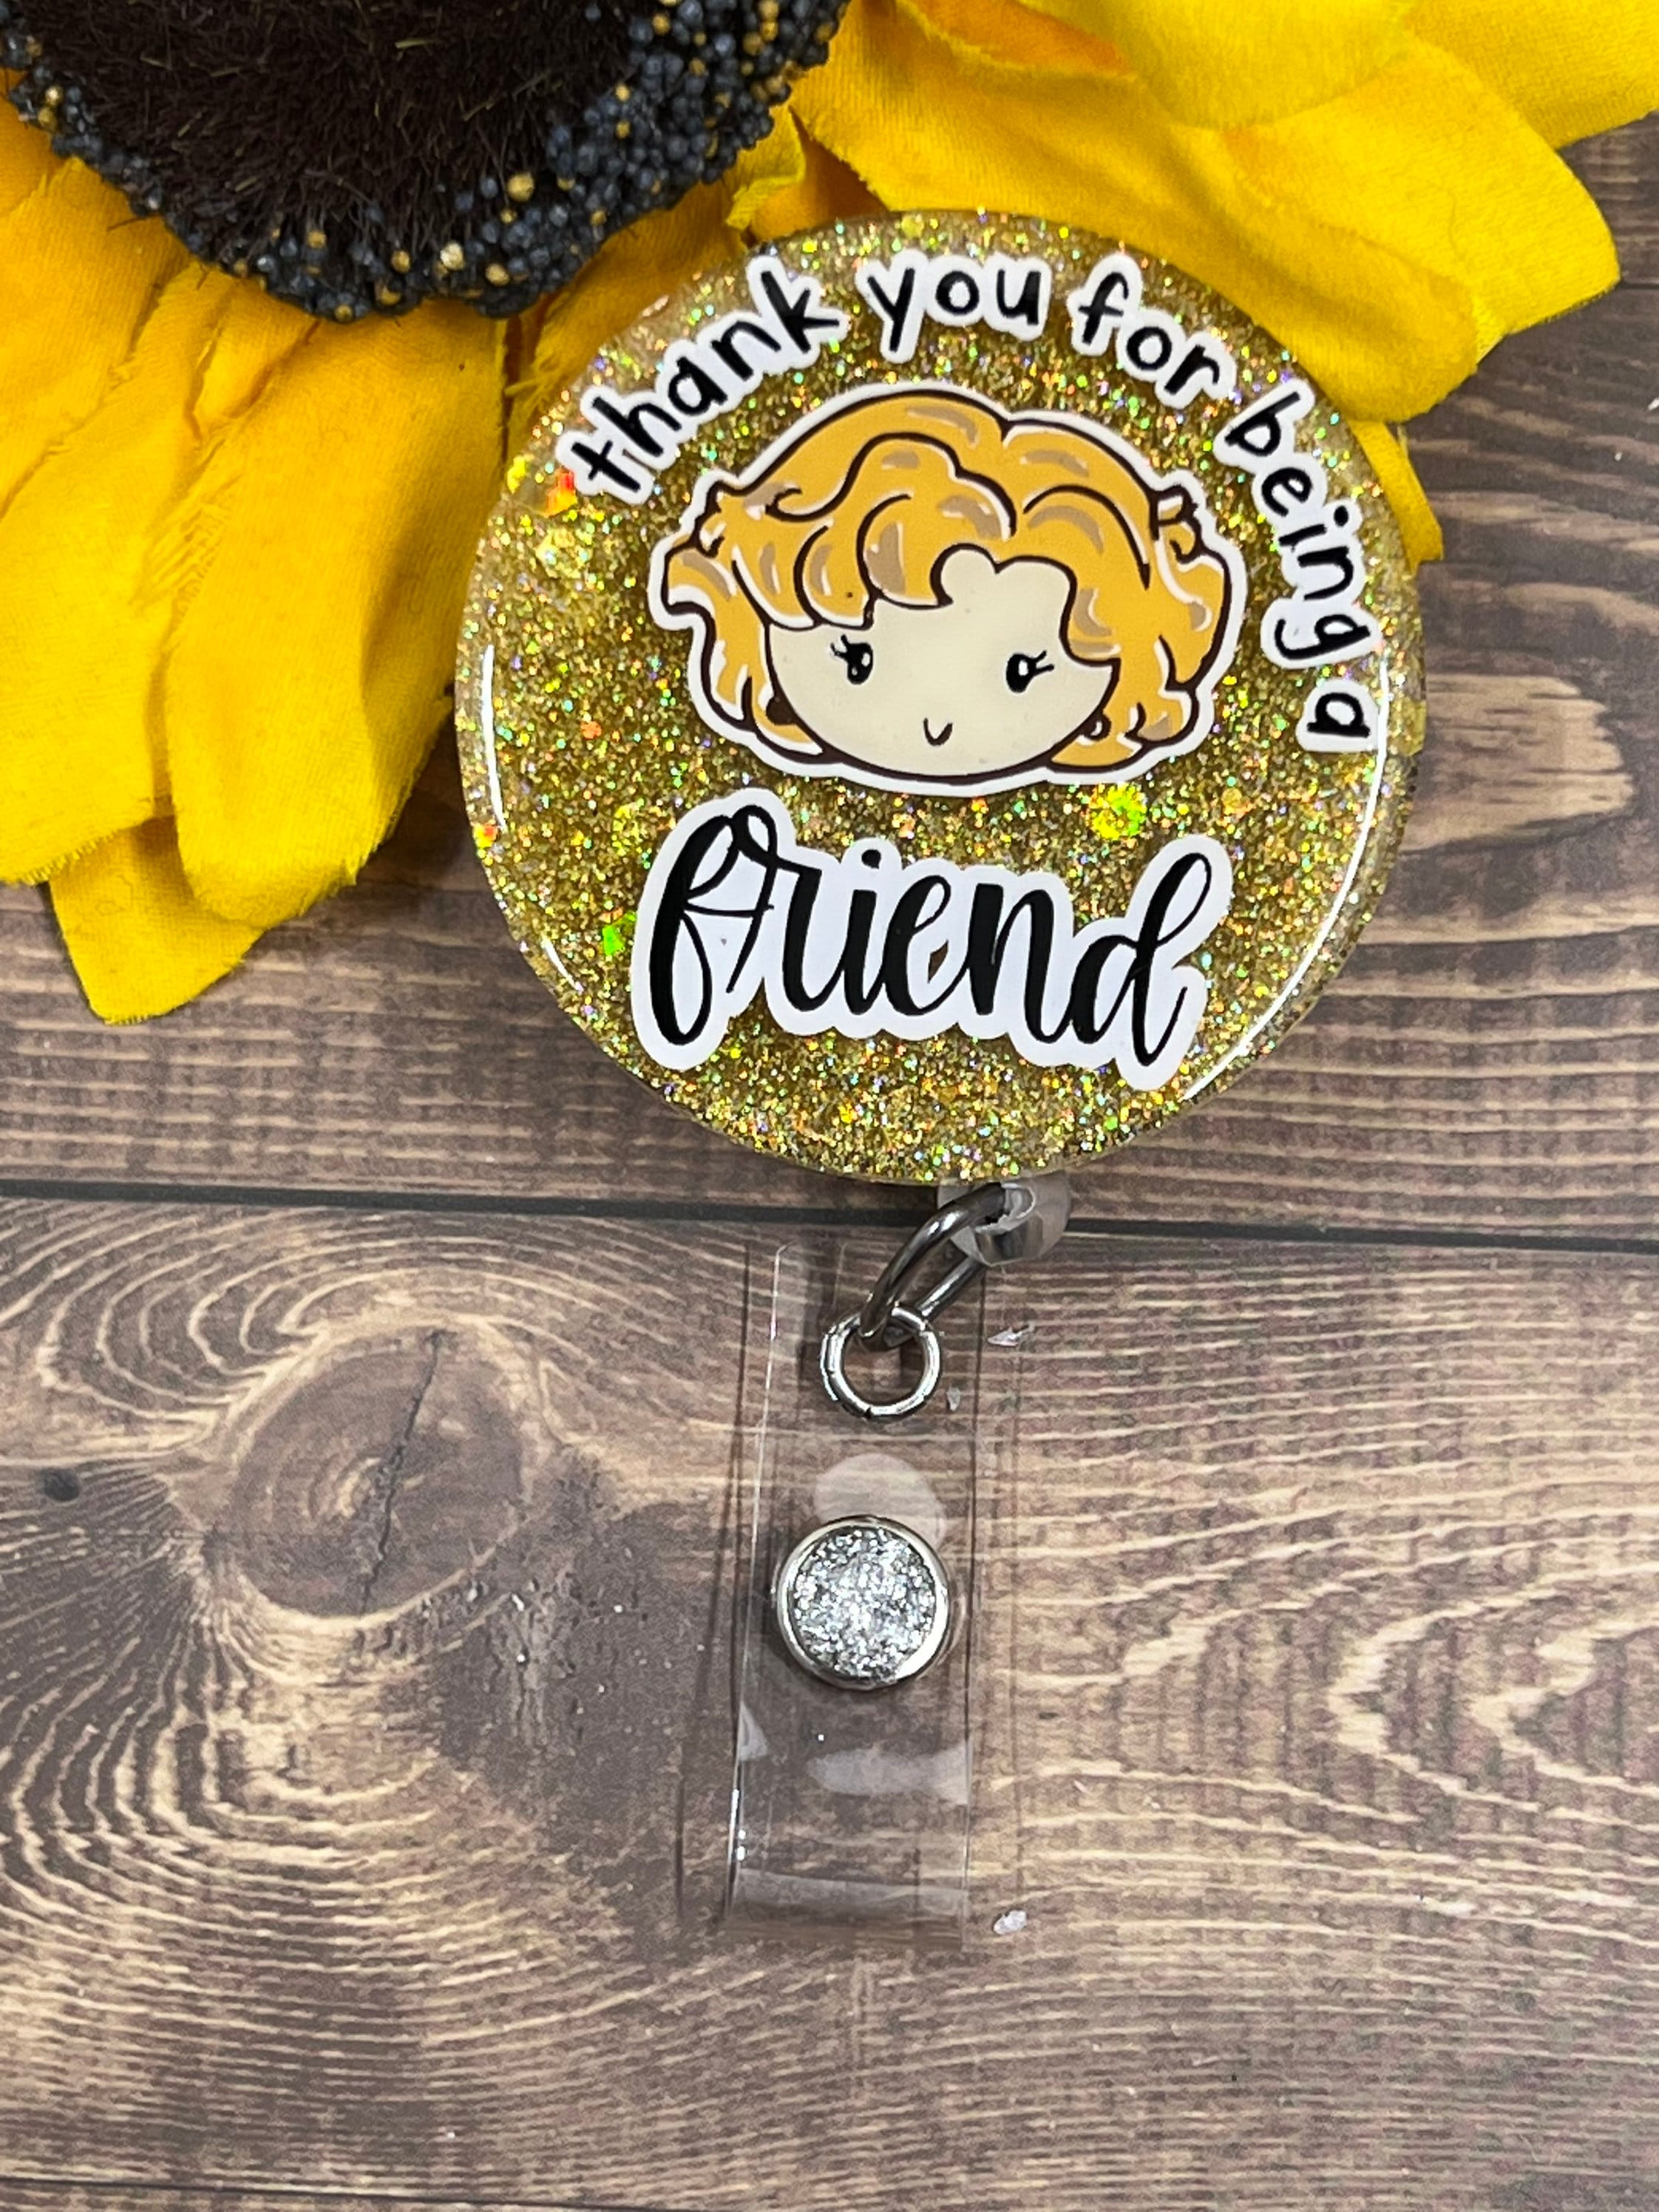 Thank You for Being A Friend Golden (girls) Badge reel-Rose, Betty White- Golden Girls Badge reel-educator/medical Badge Reel